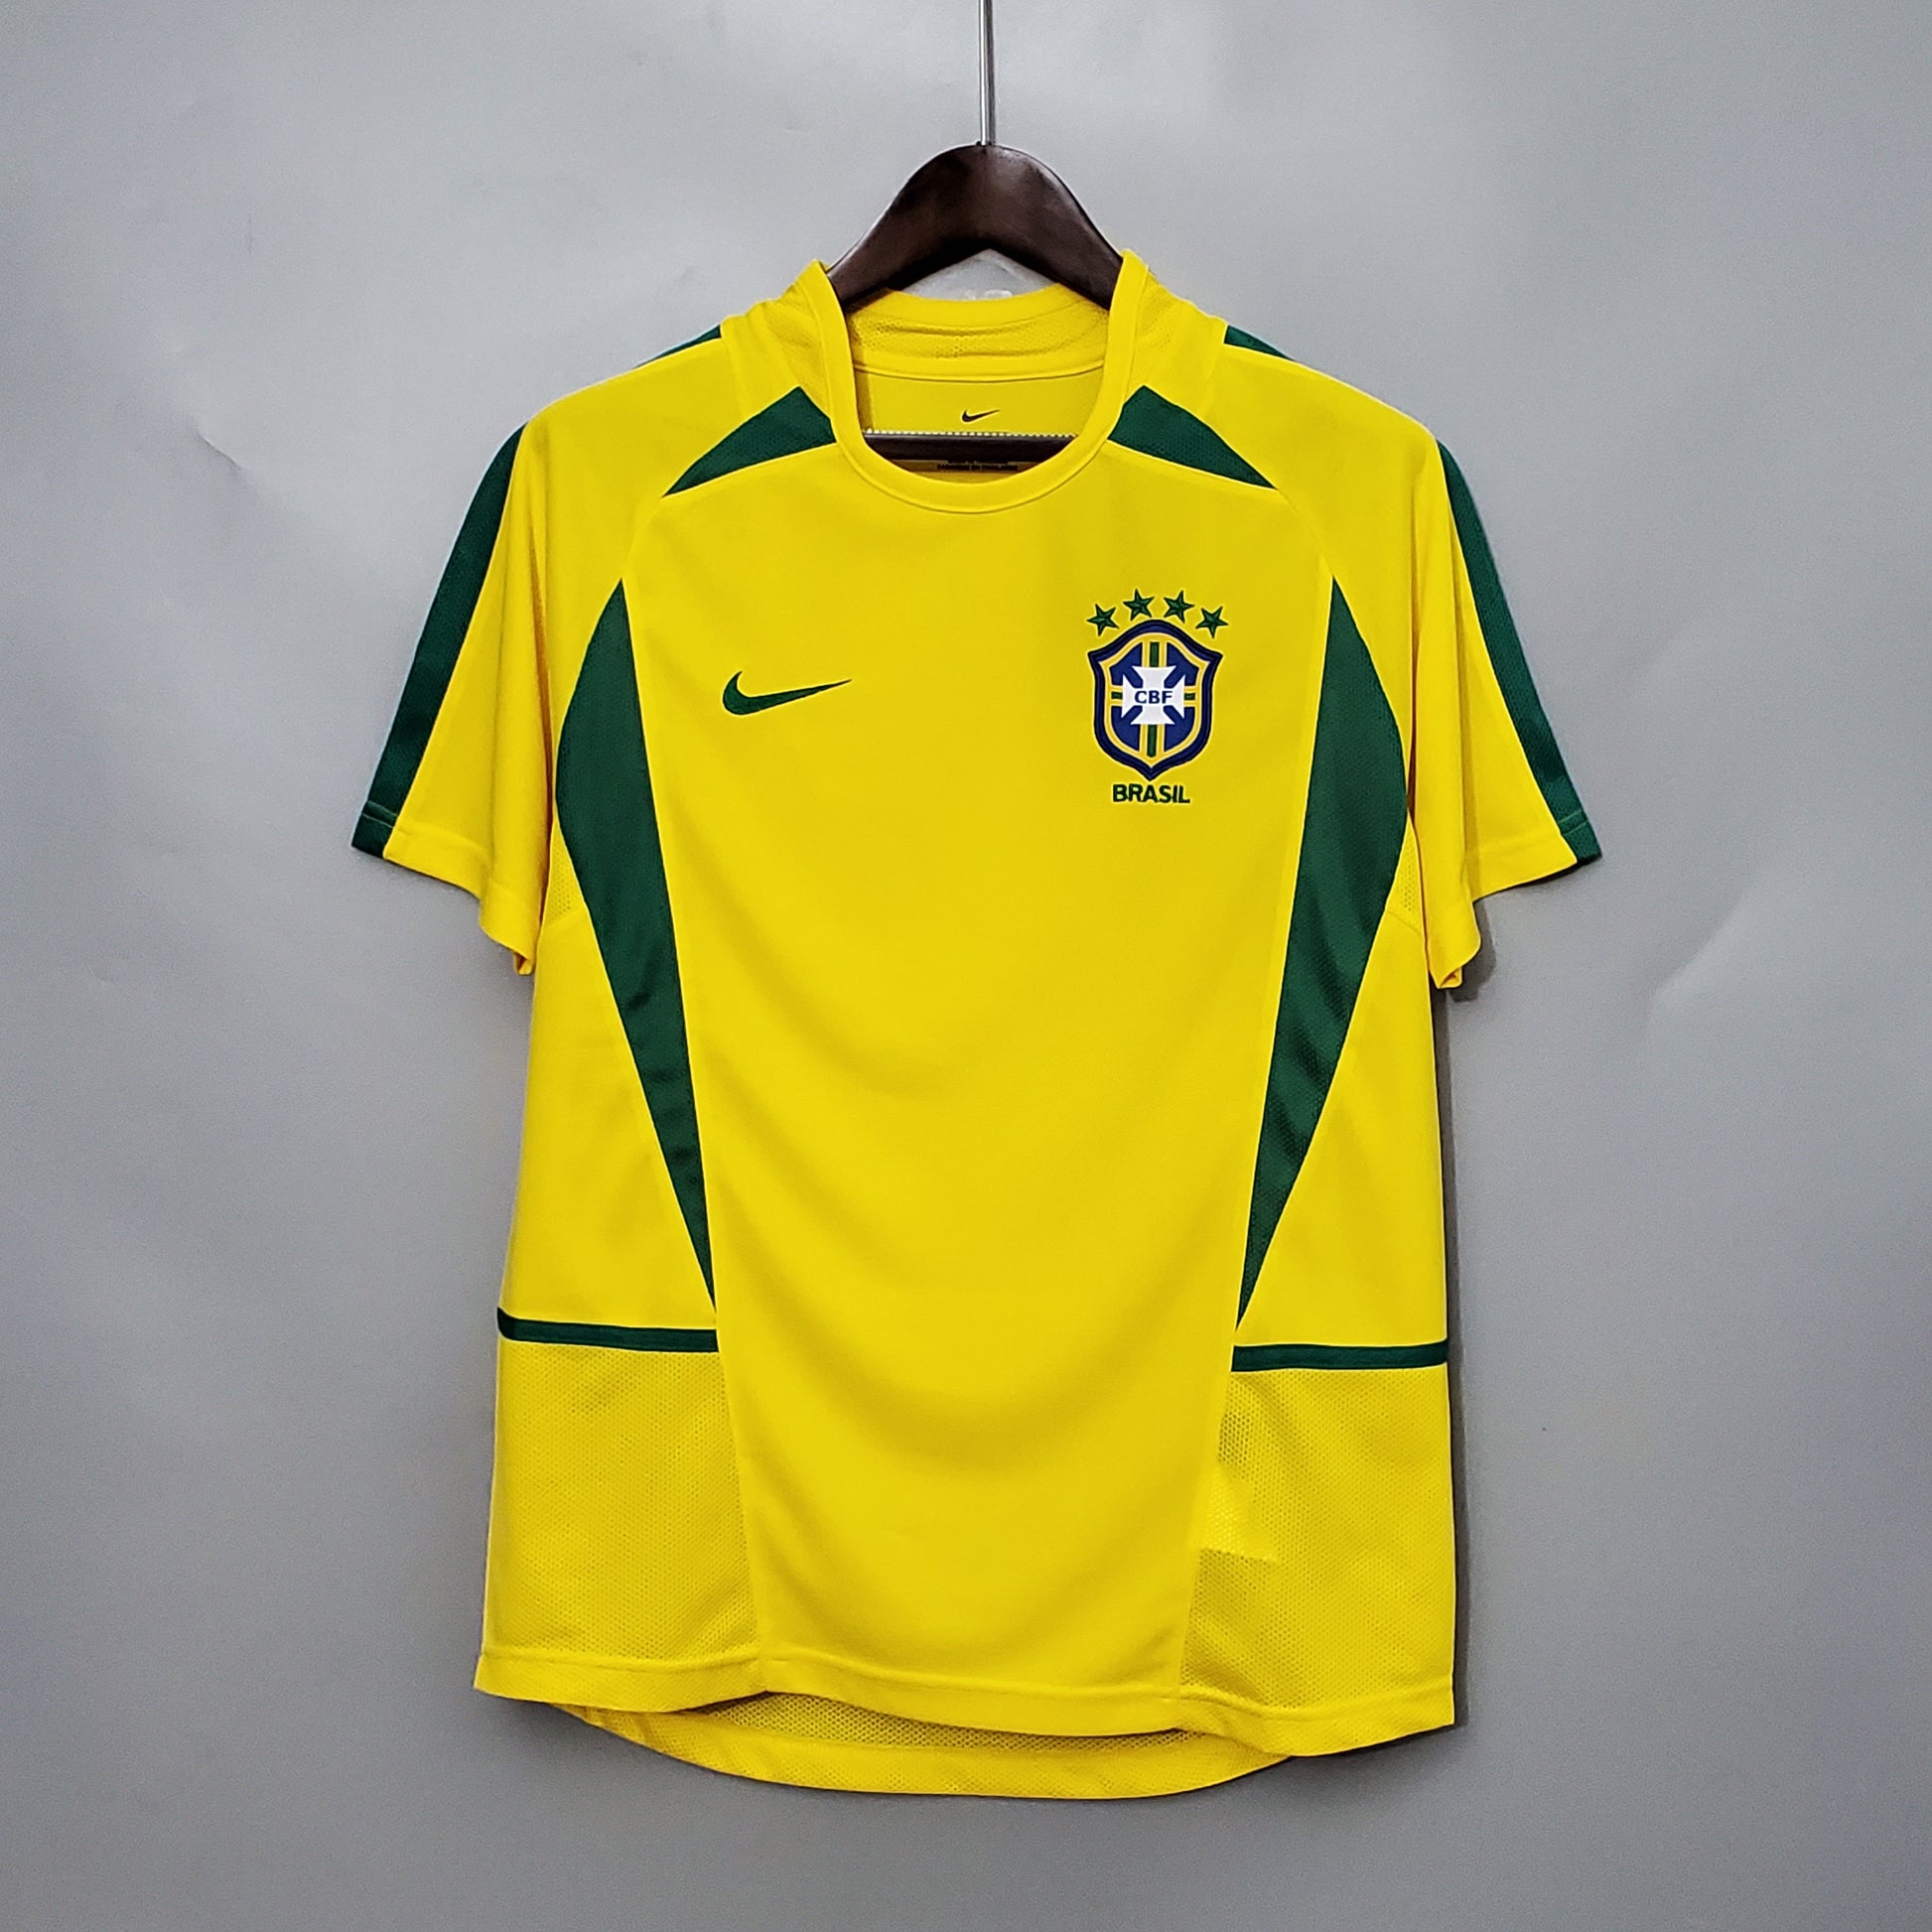 Brazil 2022 World Cup home kit: their coolest ever jersey?